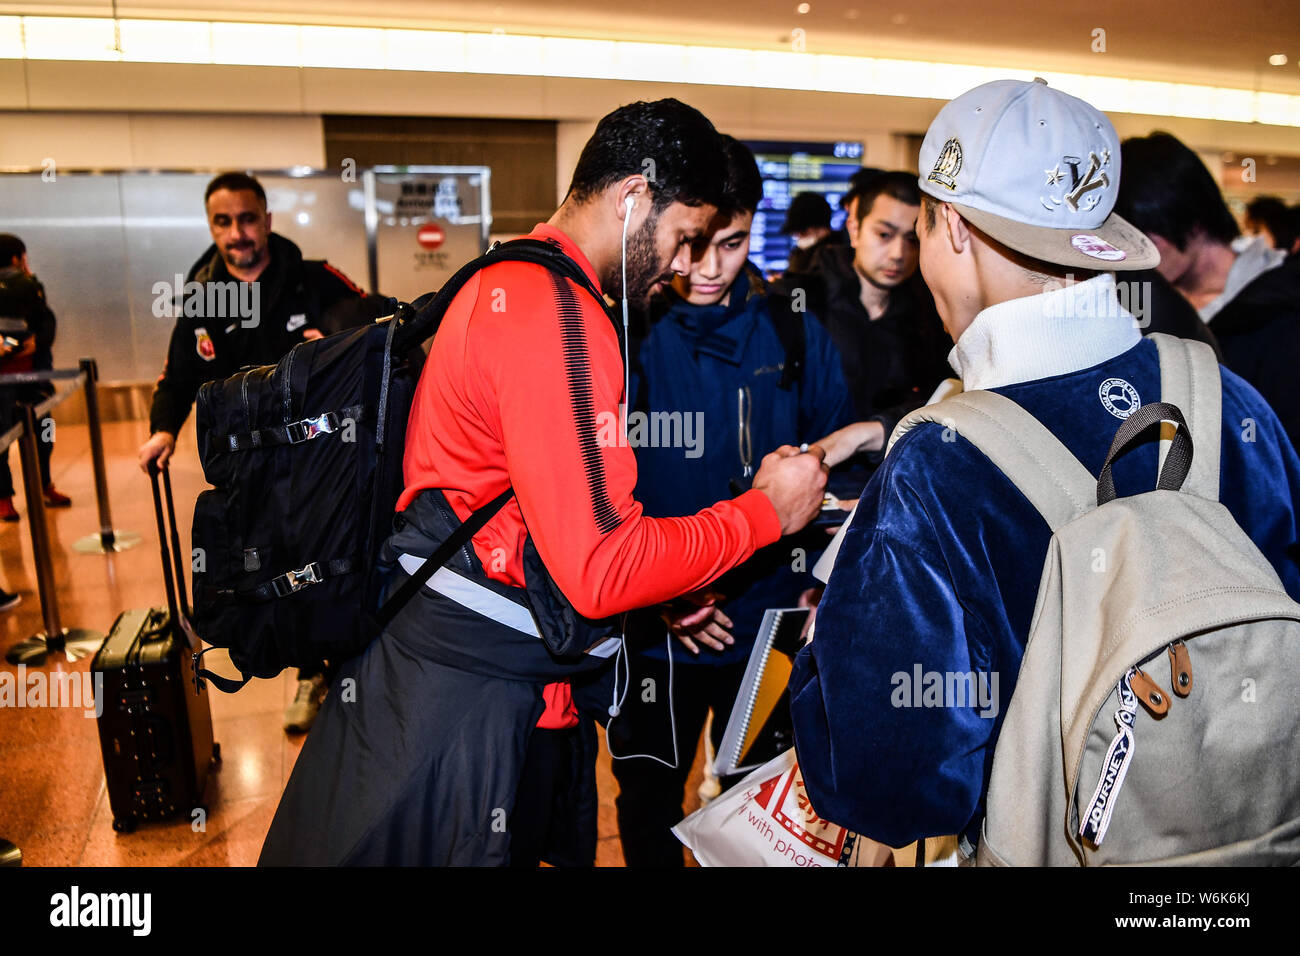 Brazilian soccer player Givanildo Vieira de Sousa, better known as Hulk, of Shanghai SIPG F.C. signs autographs for Japanese fans upon arrival at the Stock Photo